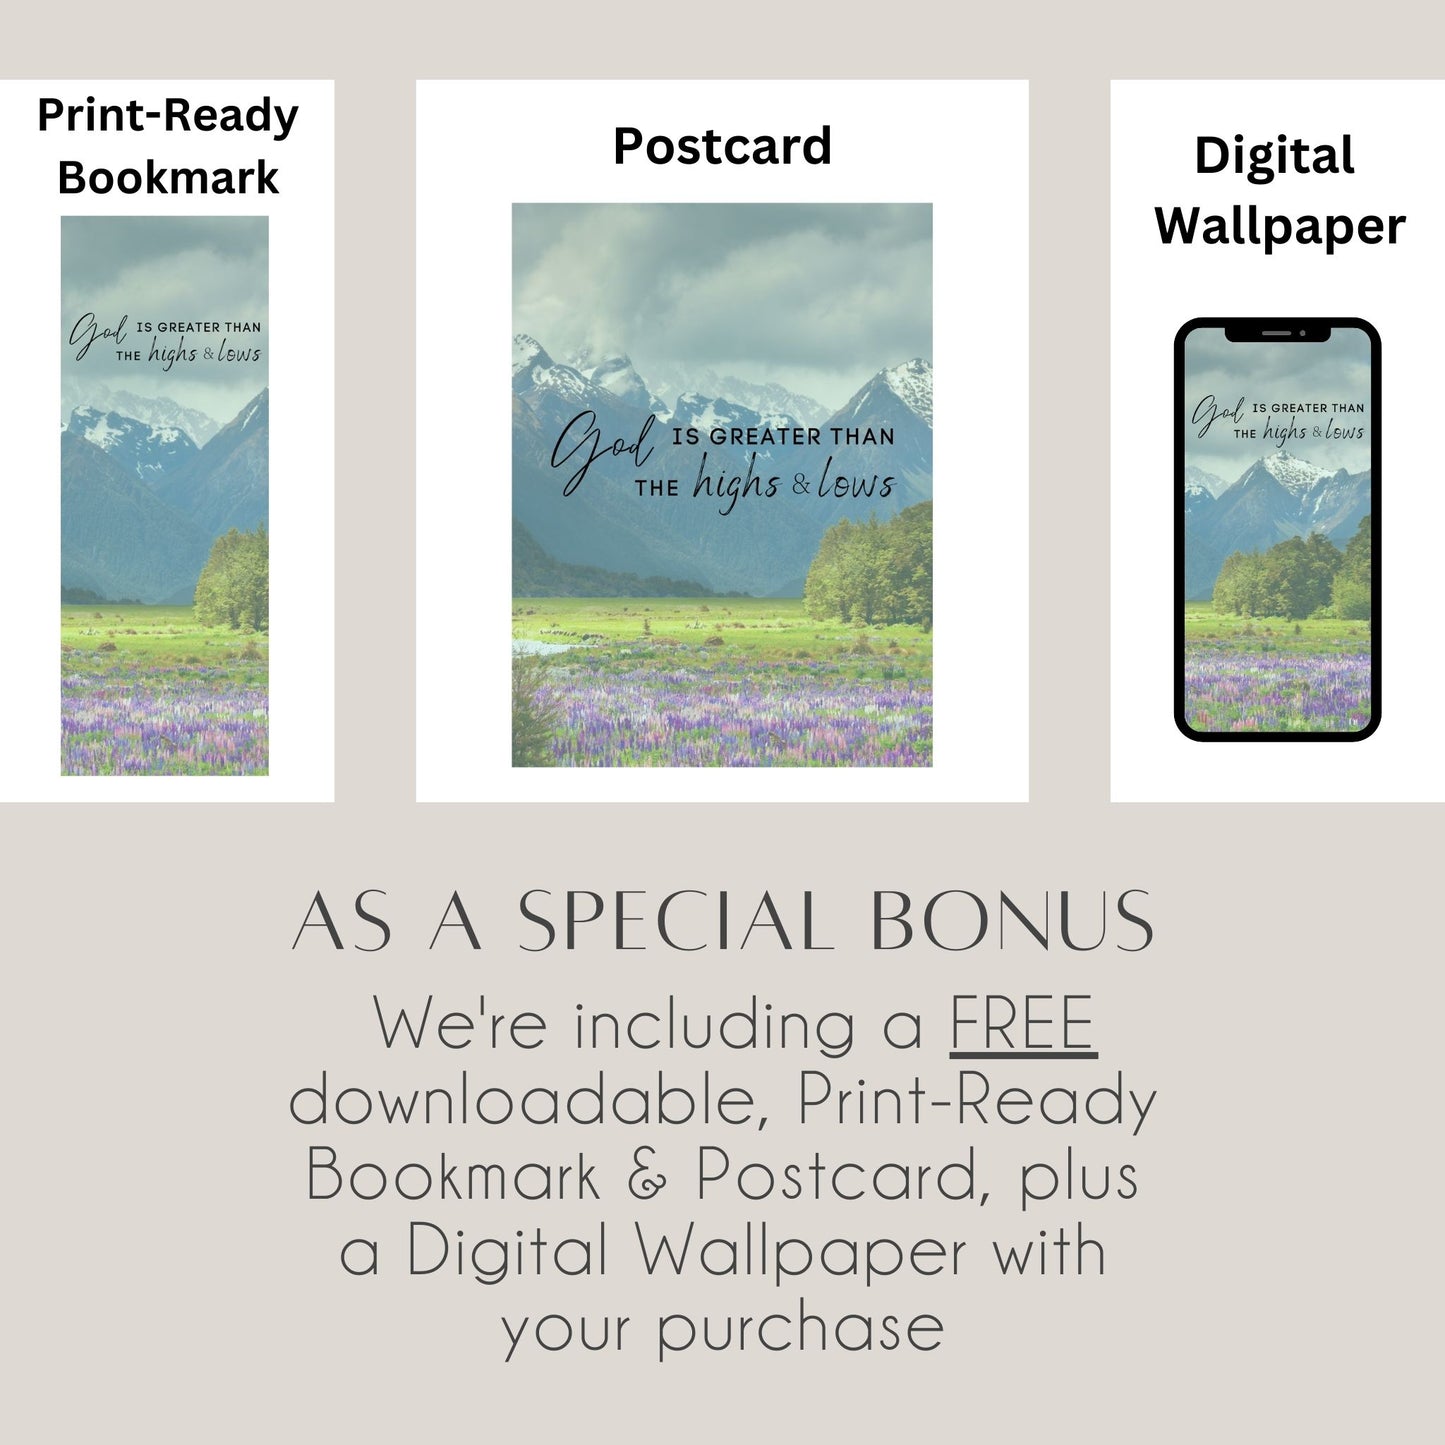 Enjoy a FREE Bonus with every purchase! Receive a set of print-ready, downloadable bookmark & postcard, and digital wallpaper in png format.